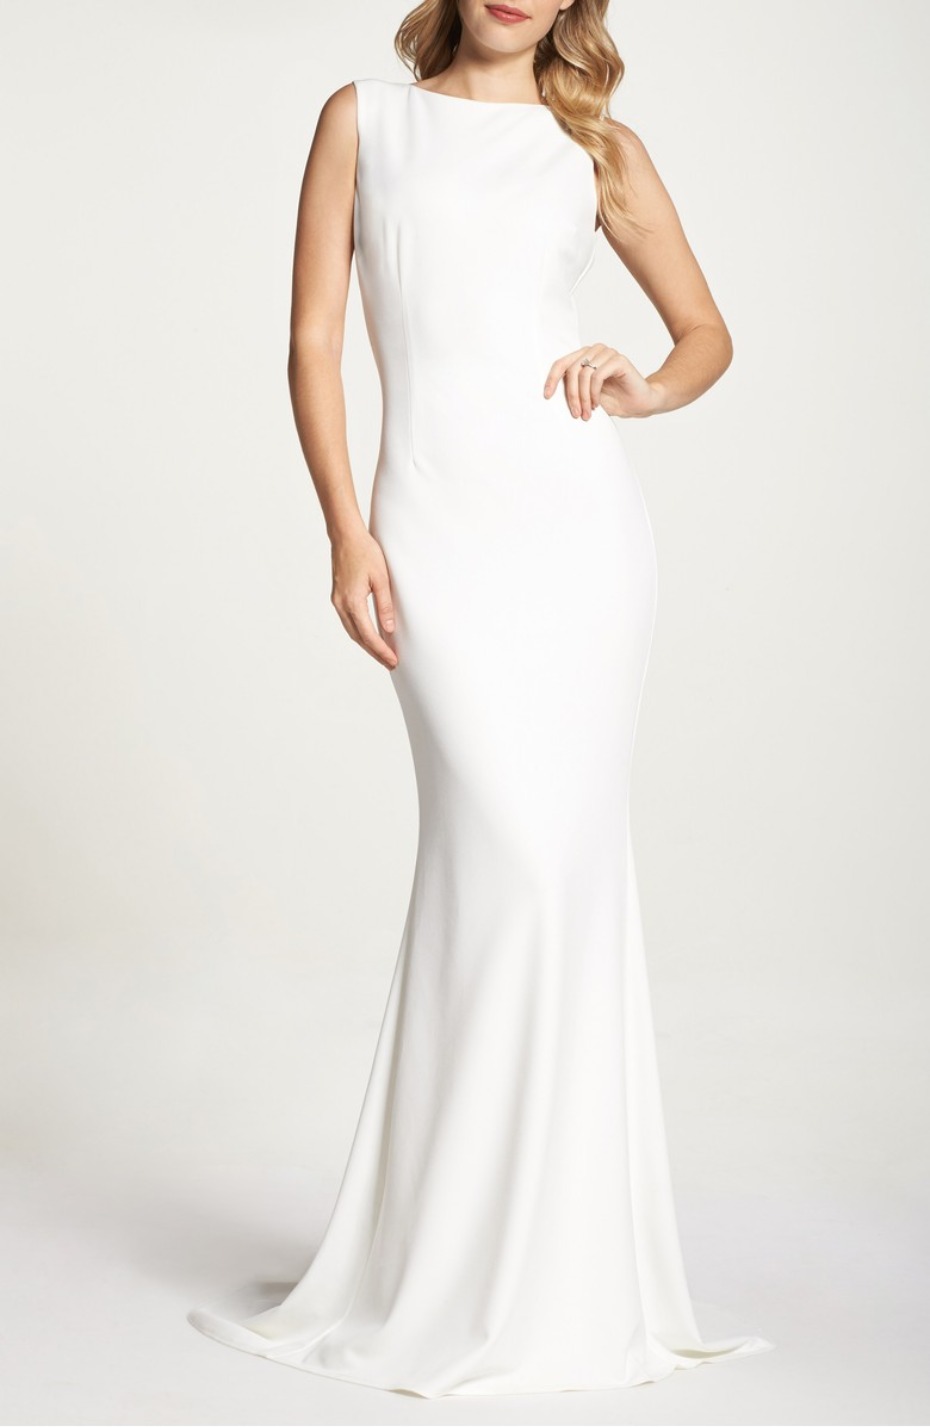 White Crepe Gown Katie May for Nordstrom